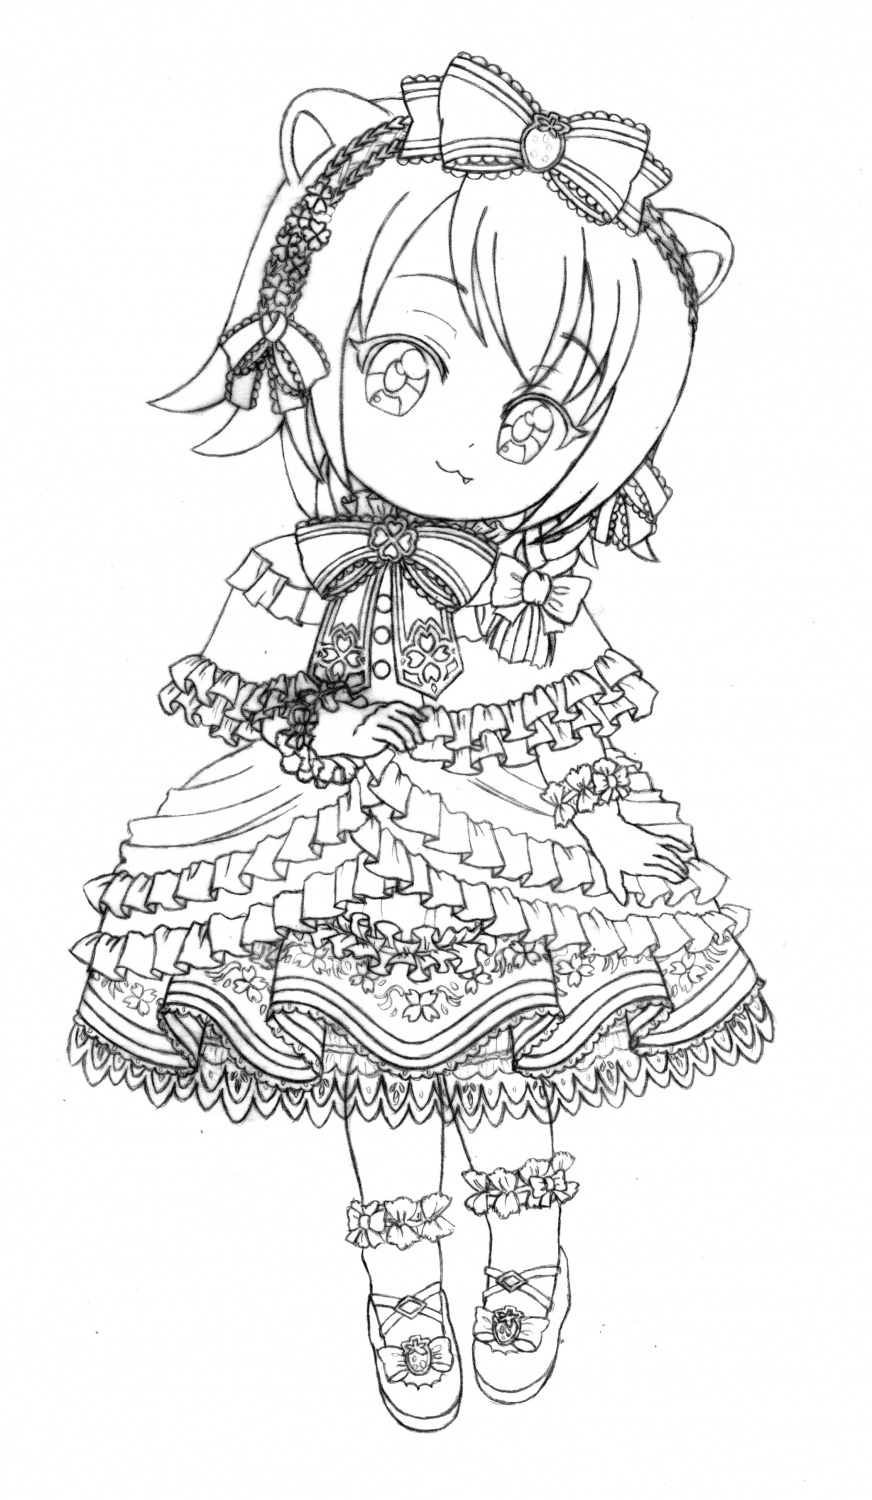 1girl :3 alternate_costume babytani bow clover dress full_body gloves hair_bow hairband head_tilt lineart lolita_fashion looking_at_viewer mary_janes paper_(medium) petticoat shoes smile